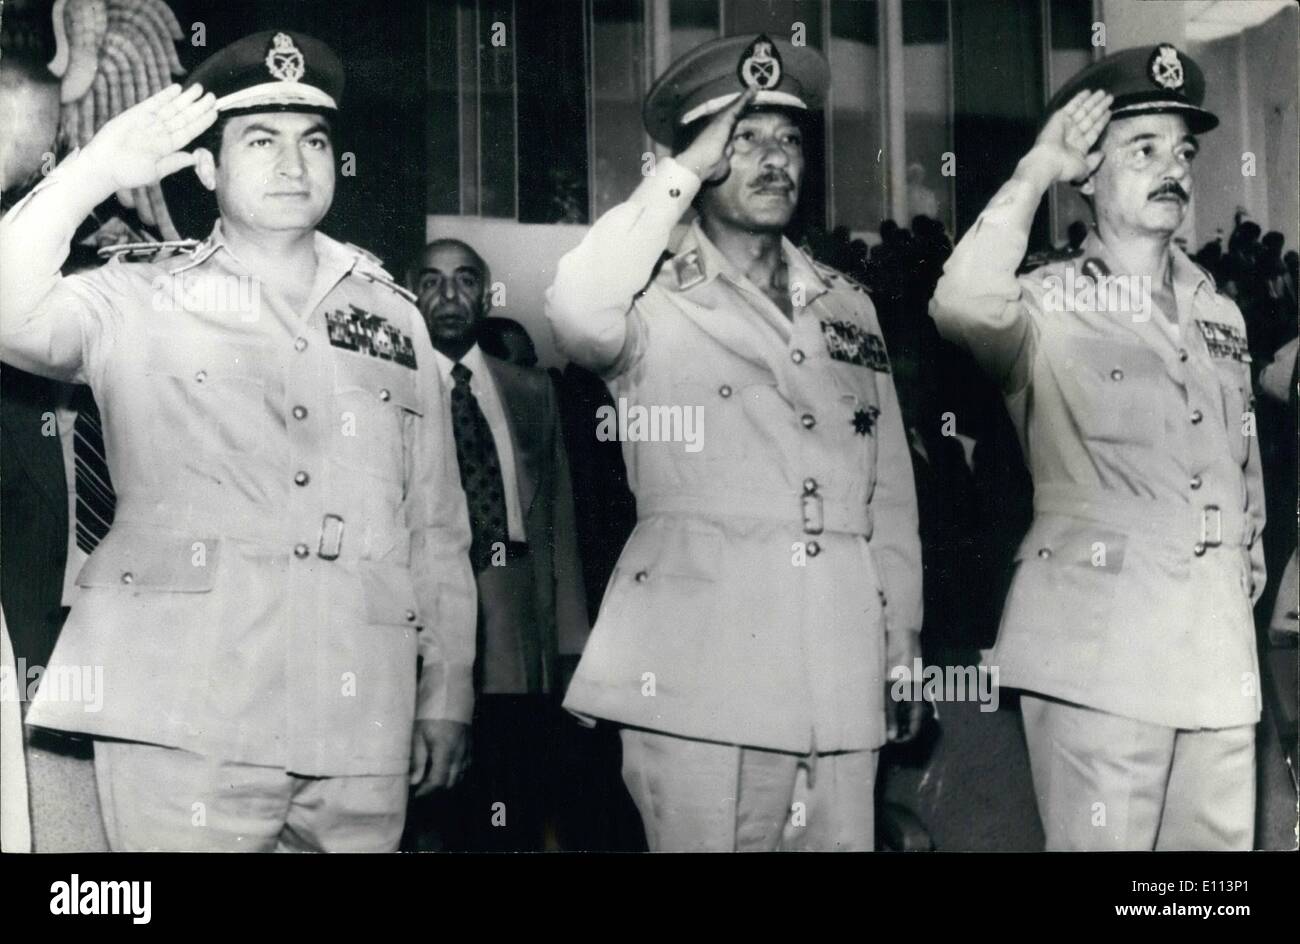 Oct. 10, 1975 - Egypt Displays Its Military Might: Egypt displayed its military might at a parade celebrating the second anniversary of the 1973 war with Israel. President Sadat, in the uniform of the supreme commander of armed forces, took the salute as token units with various weapons filed past his reviewing stand at Nasr (victory) City near Cairo. The military display included Western aircraft and arms which were appearing for the first time Stock Photo